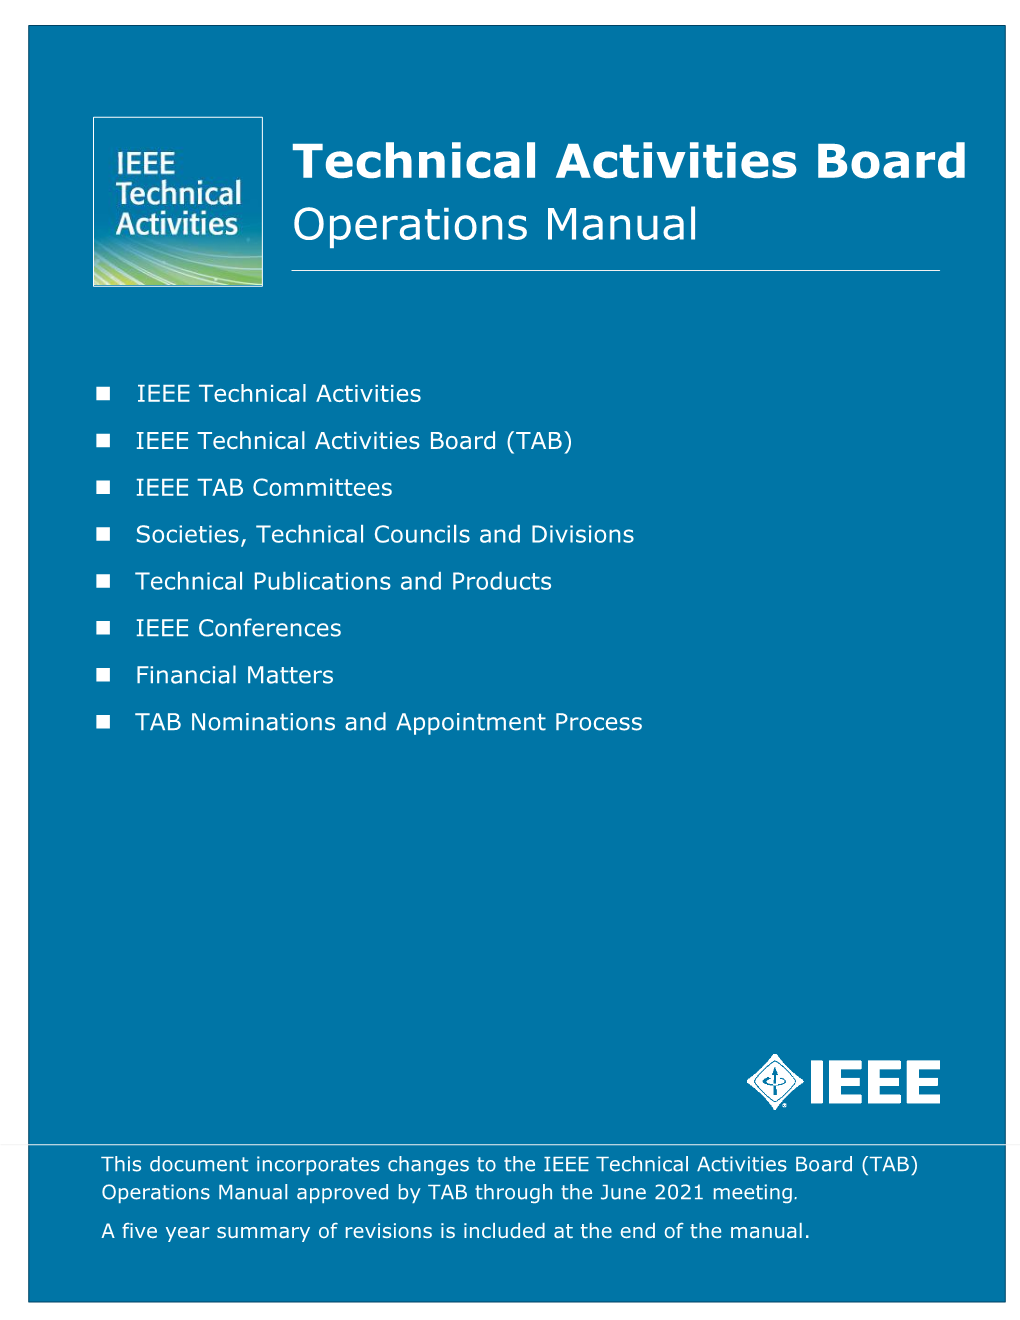 IEEE Technical Activities Board Operations Manual, Published Here, Has Been Arranged in Eight Sections, Each Covering a Different Facet of IEEE Technical Activities